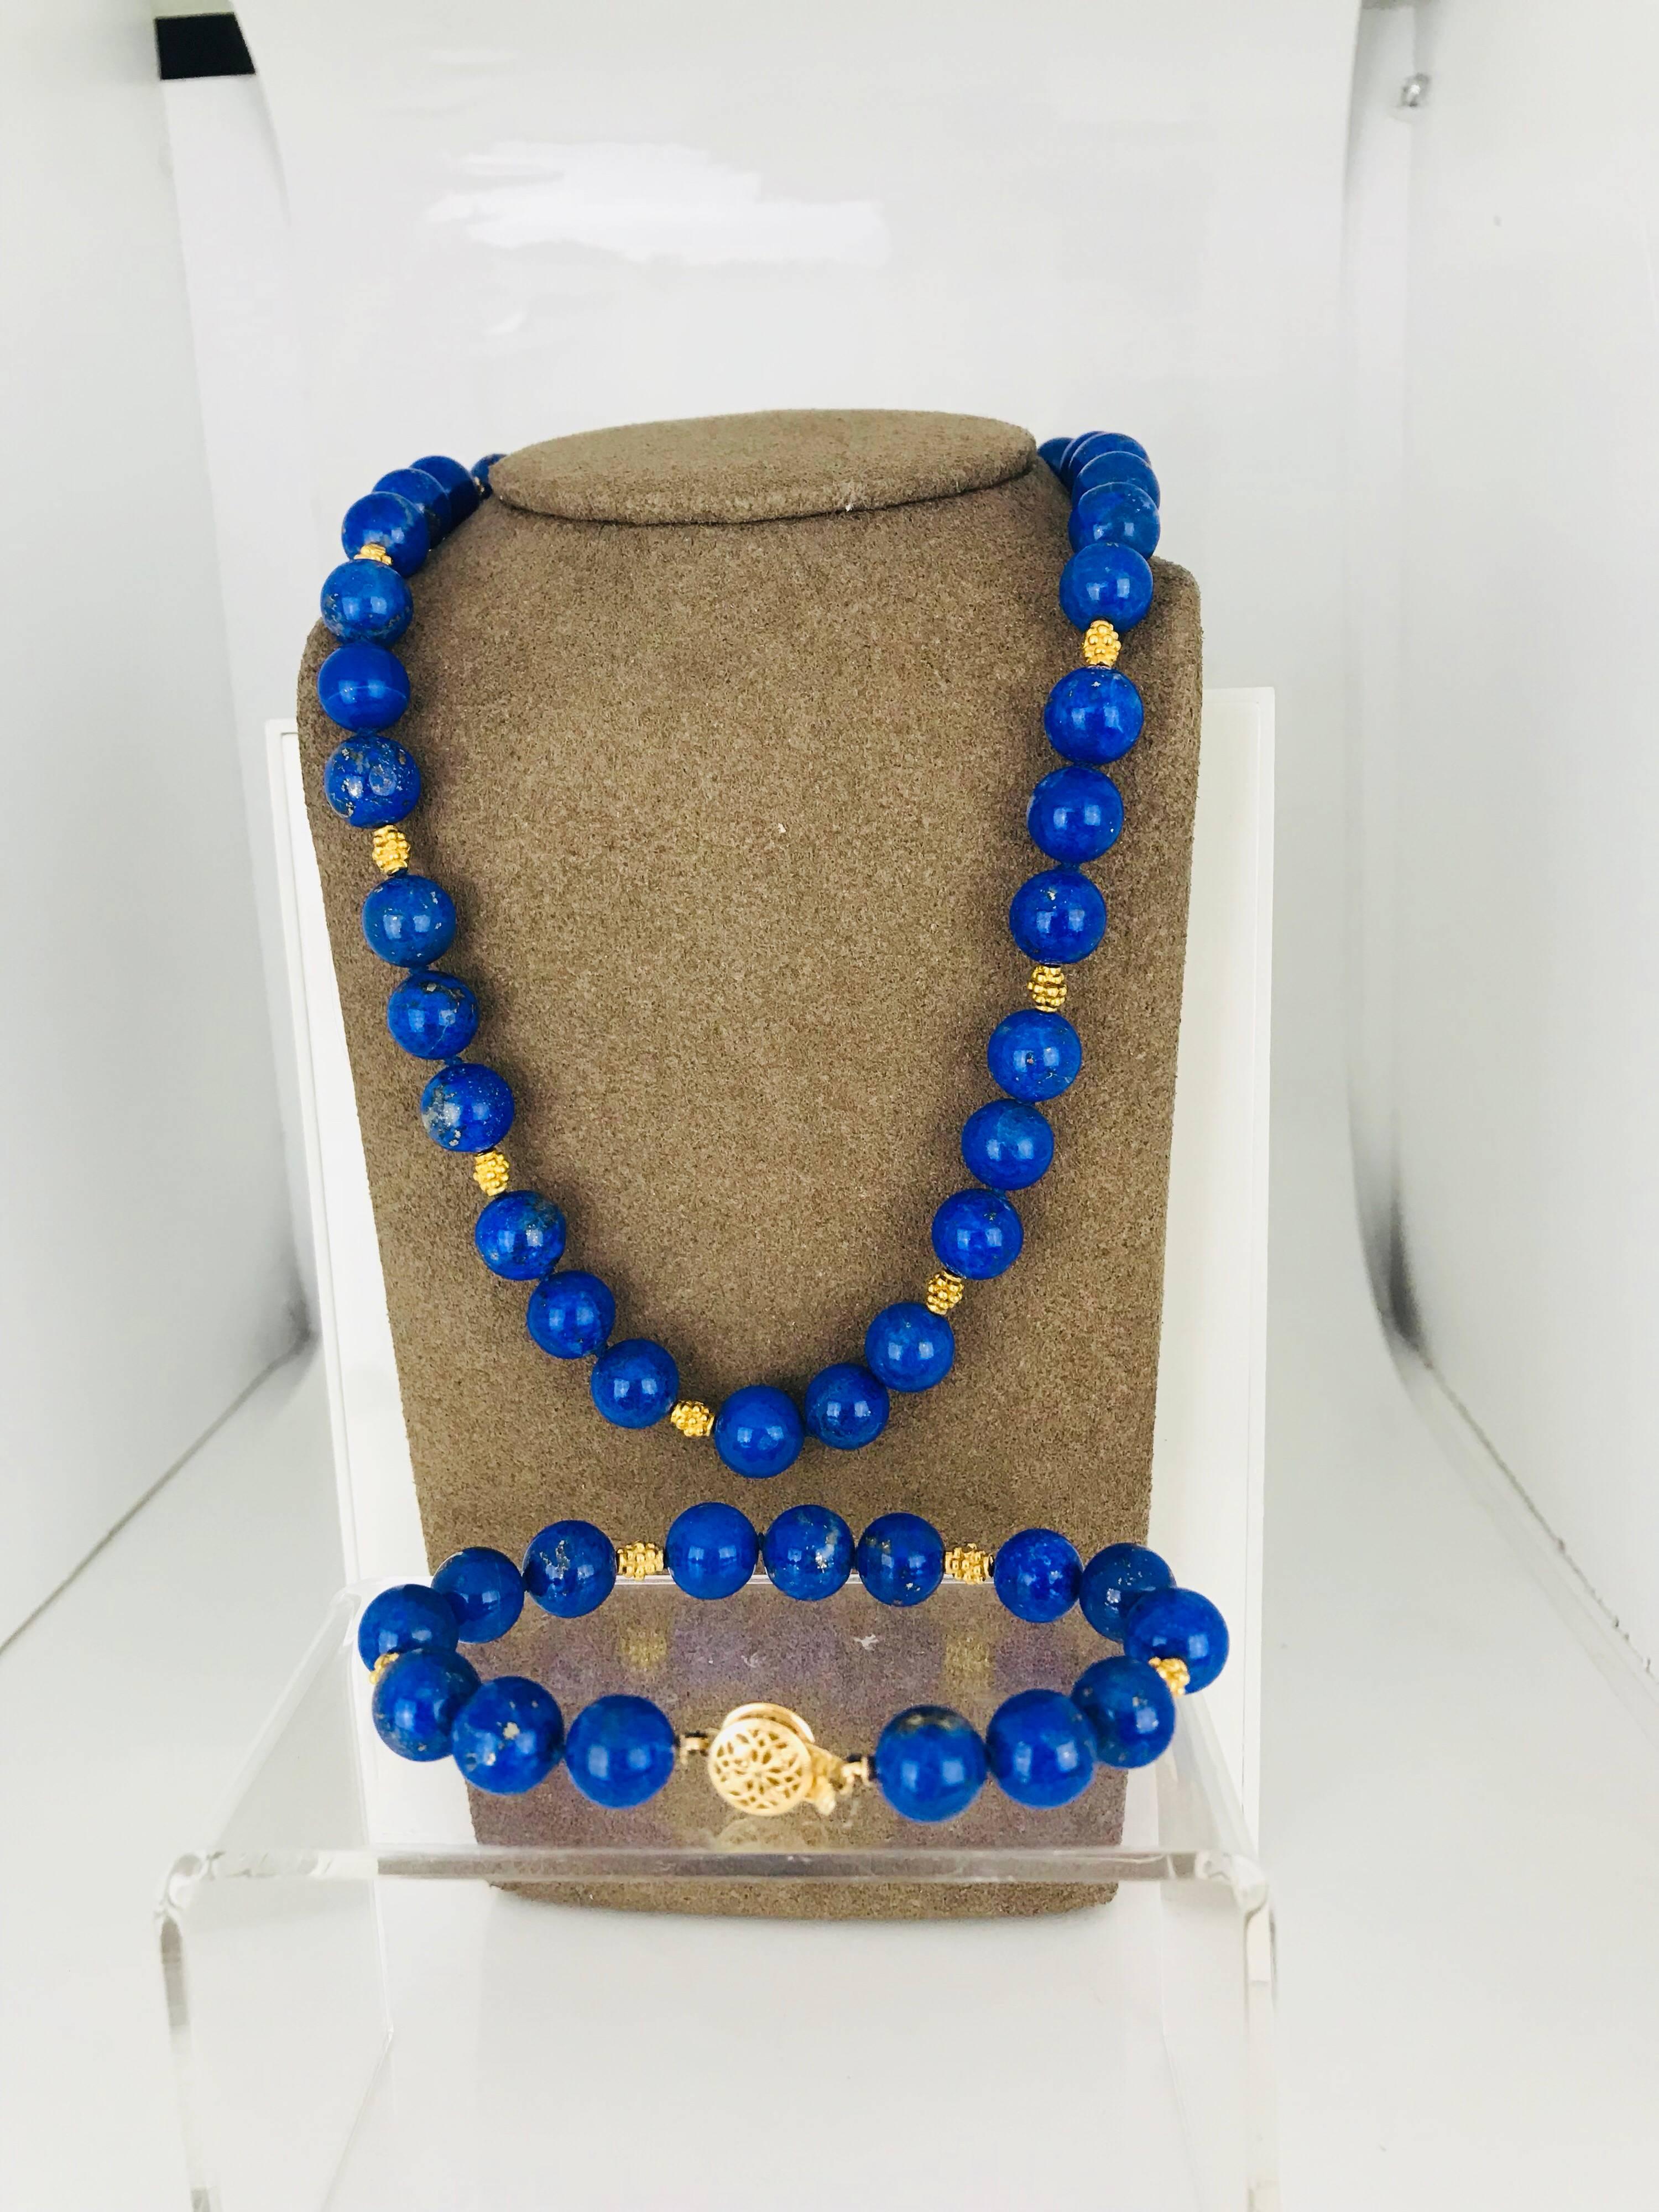 Contemporary, matching Necklace and Bracelet made of Lapis Lazui 9.65 millimeter and 14 karat yellow gold accents. 
The necklace is 16 inches in length
The bracelet is 7 1/4 inches in length
Rich Blue Color.

GIA Gemologist, Inspected and Evaluated
